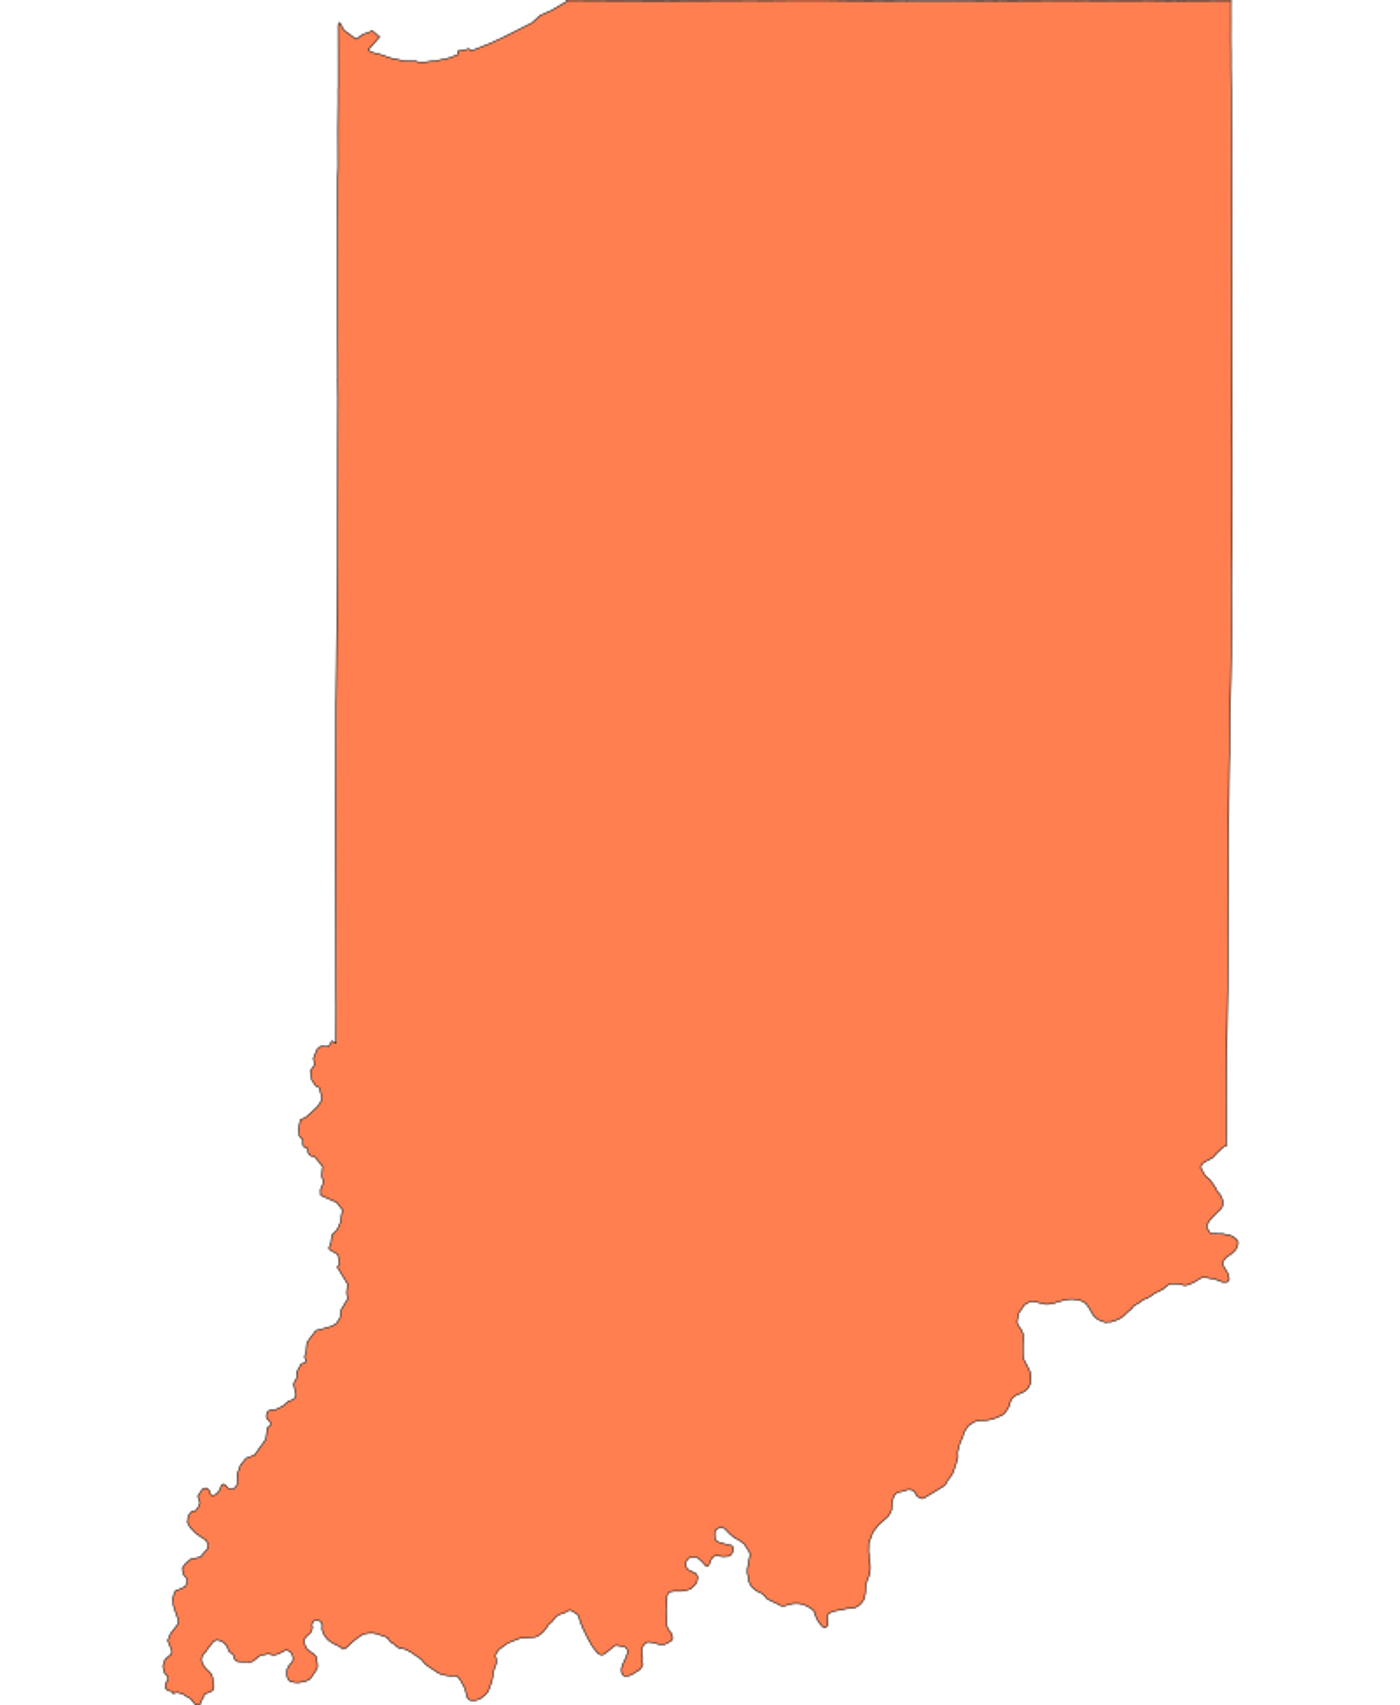 Indiana Outline